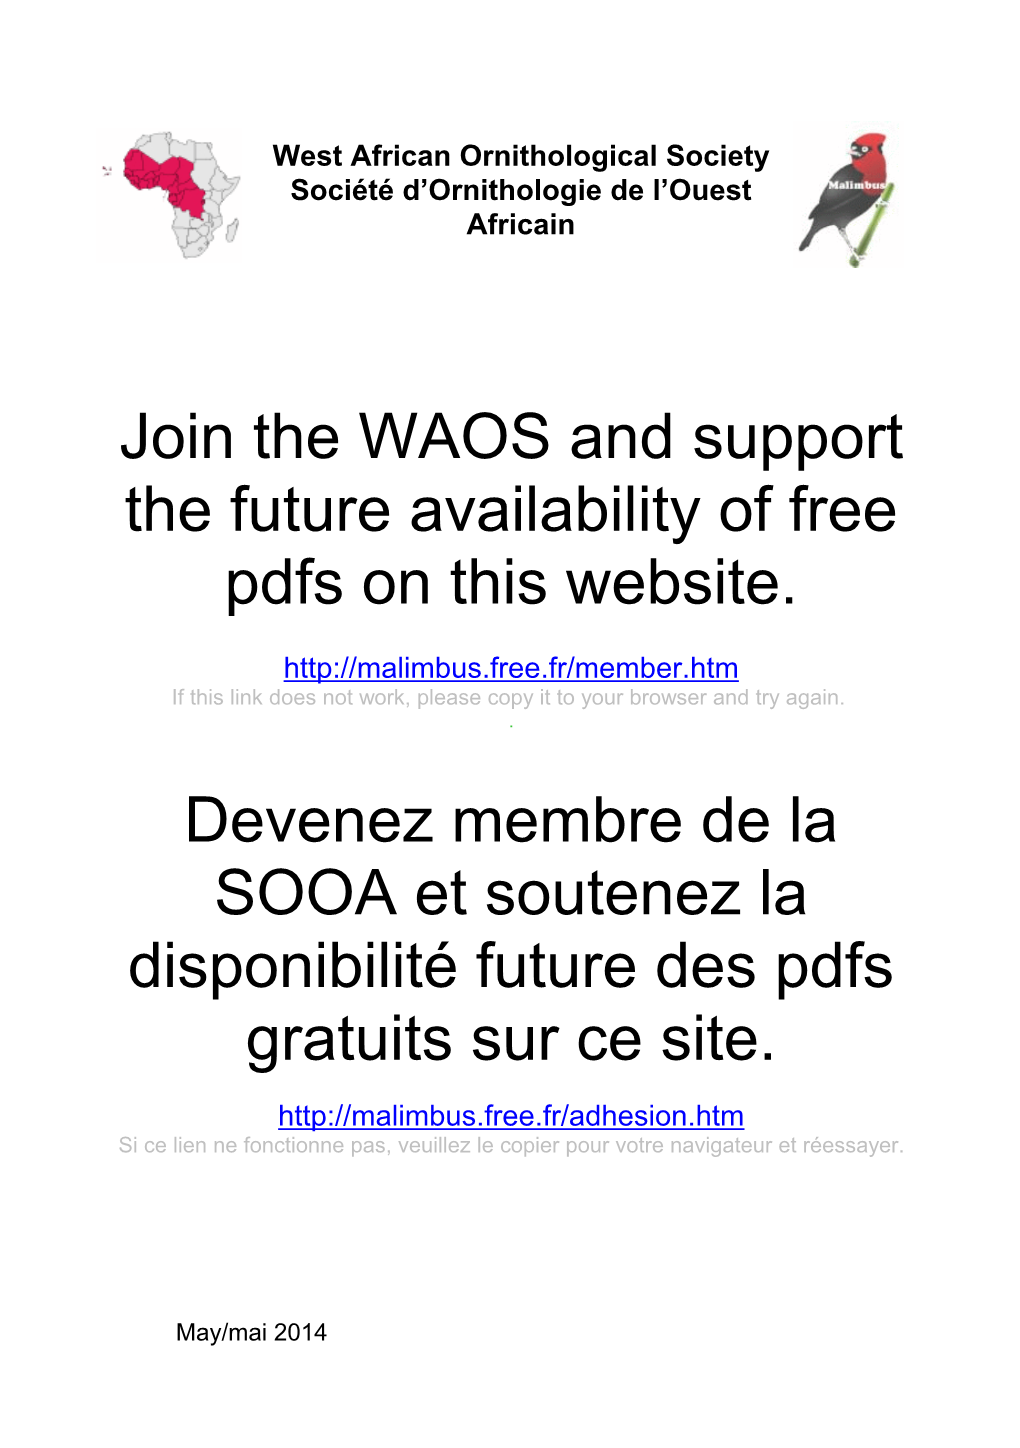 Join the WAOS and Support the Future Availability of Free Pdfs on This Website